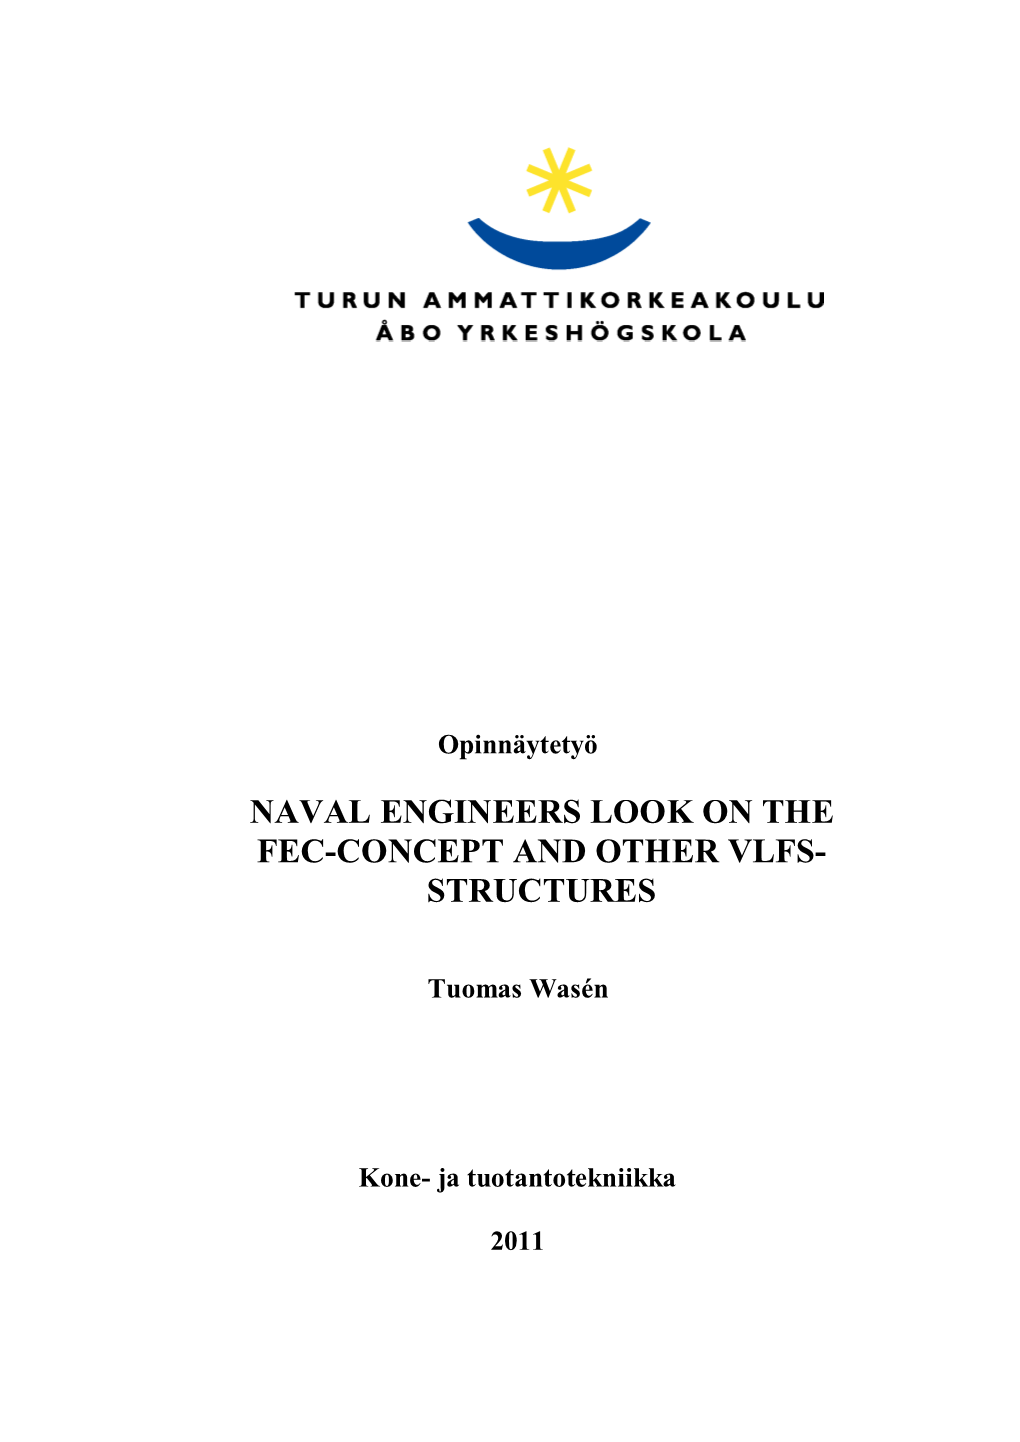 Naval Engineers Look on the Fec-Concept and Other Vlfs- Structures